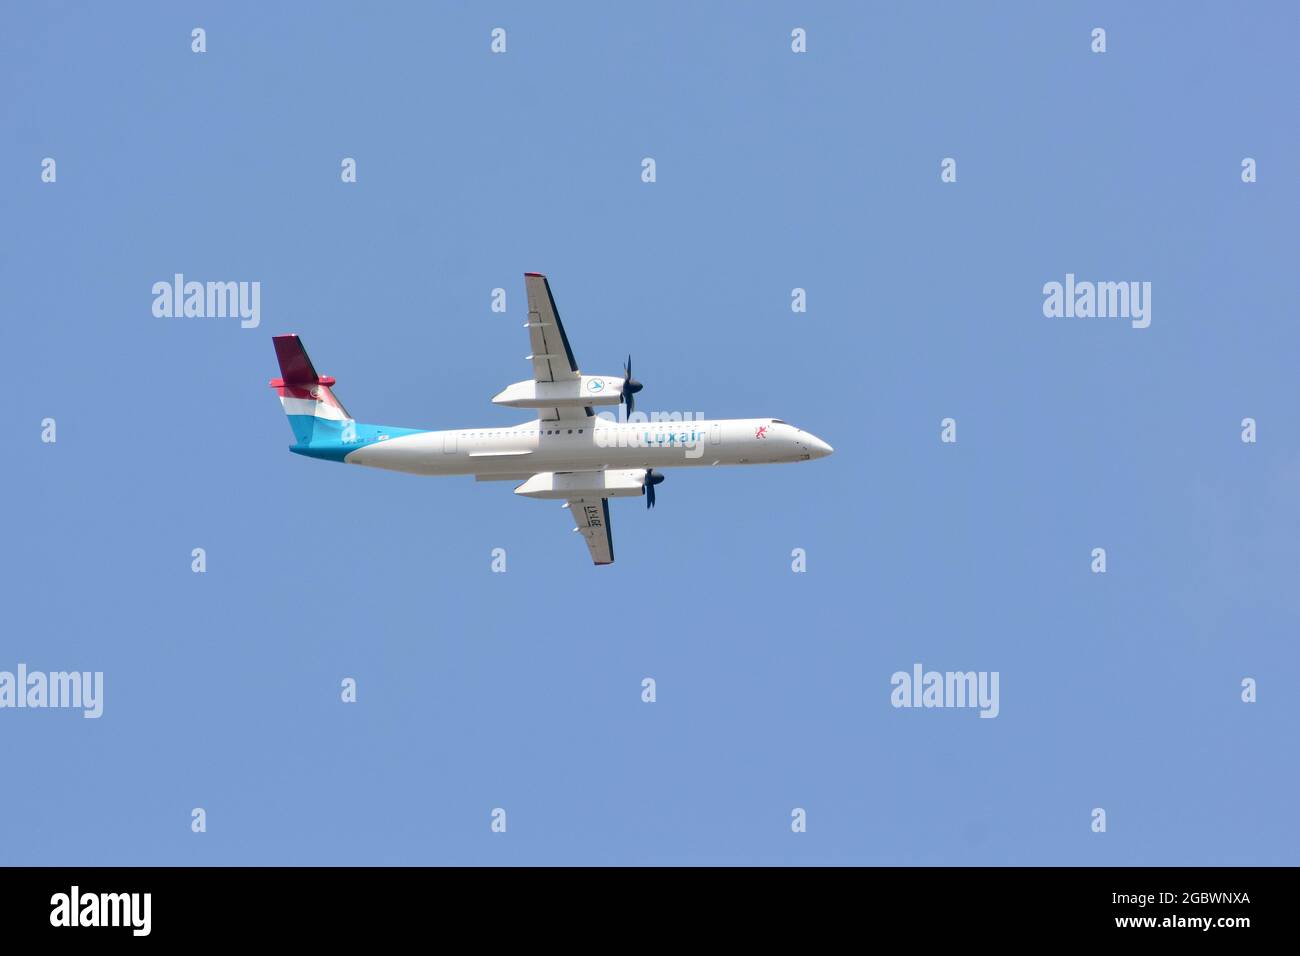 Luxair (is the flag carrier airline of Luxembourg), De Havilland Canada Dash 8-400 airplane (turboprop-powered) Stock Photo